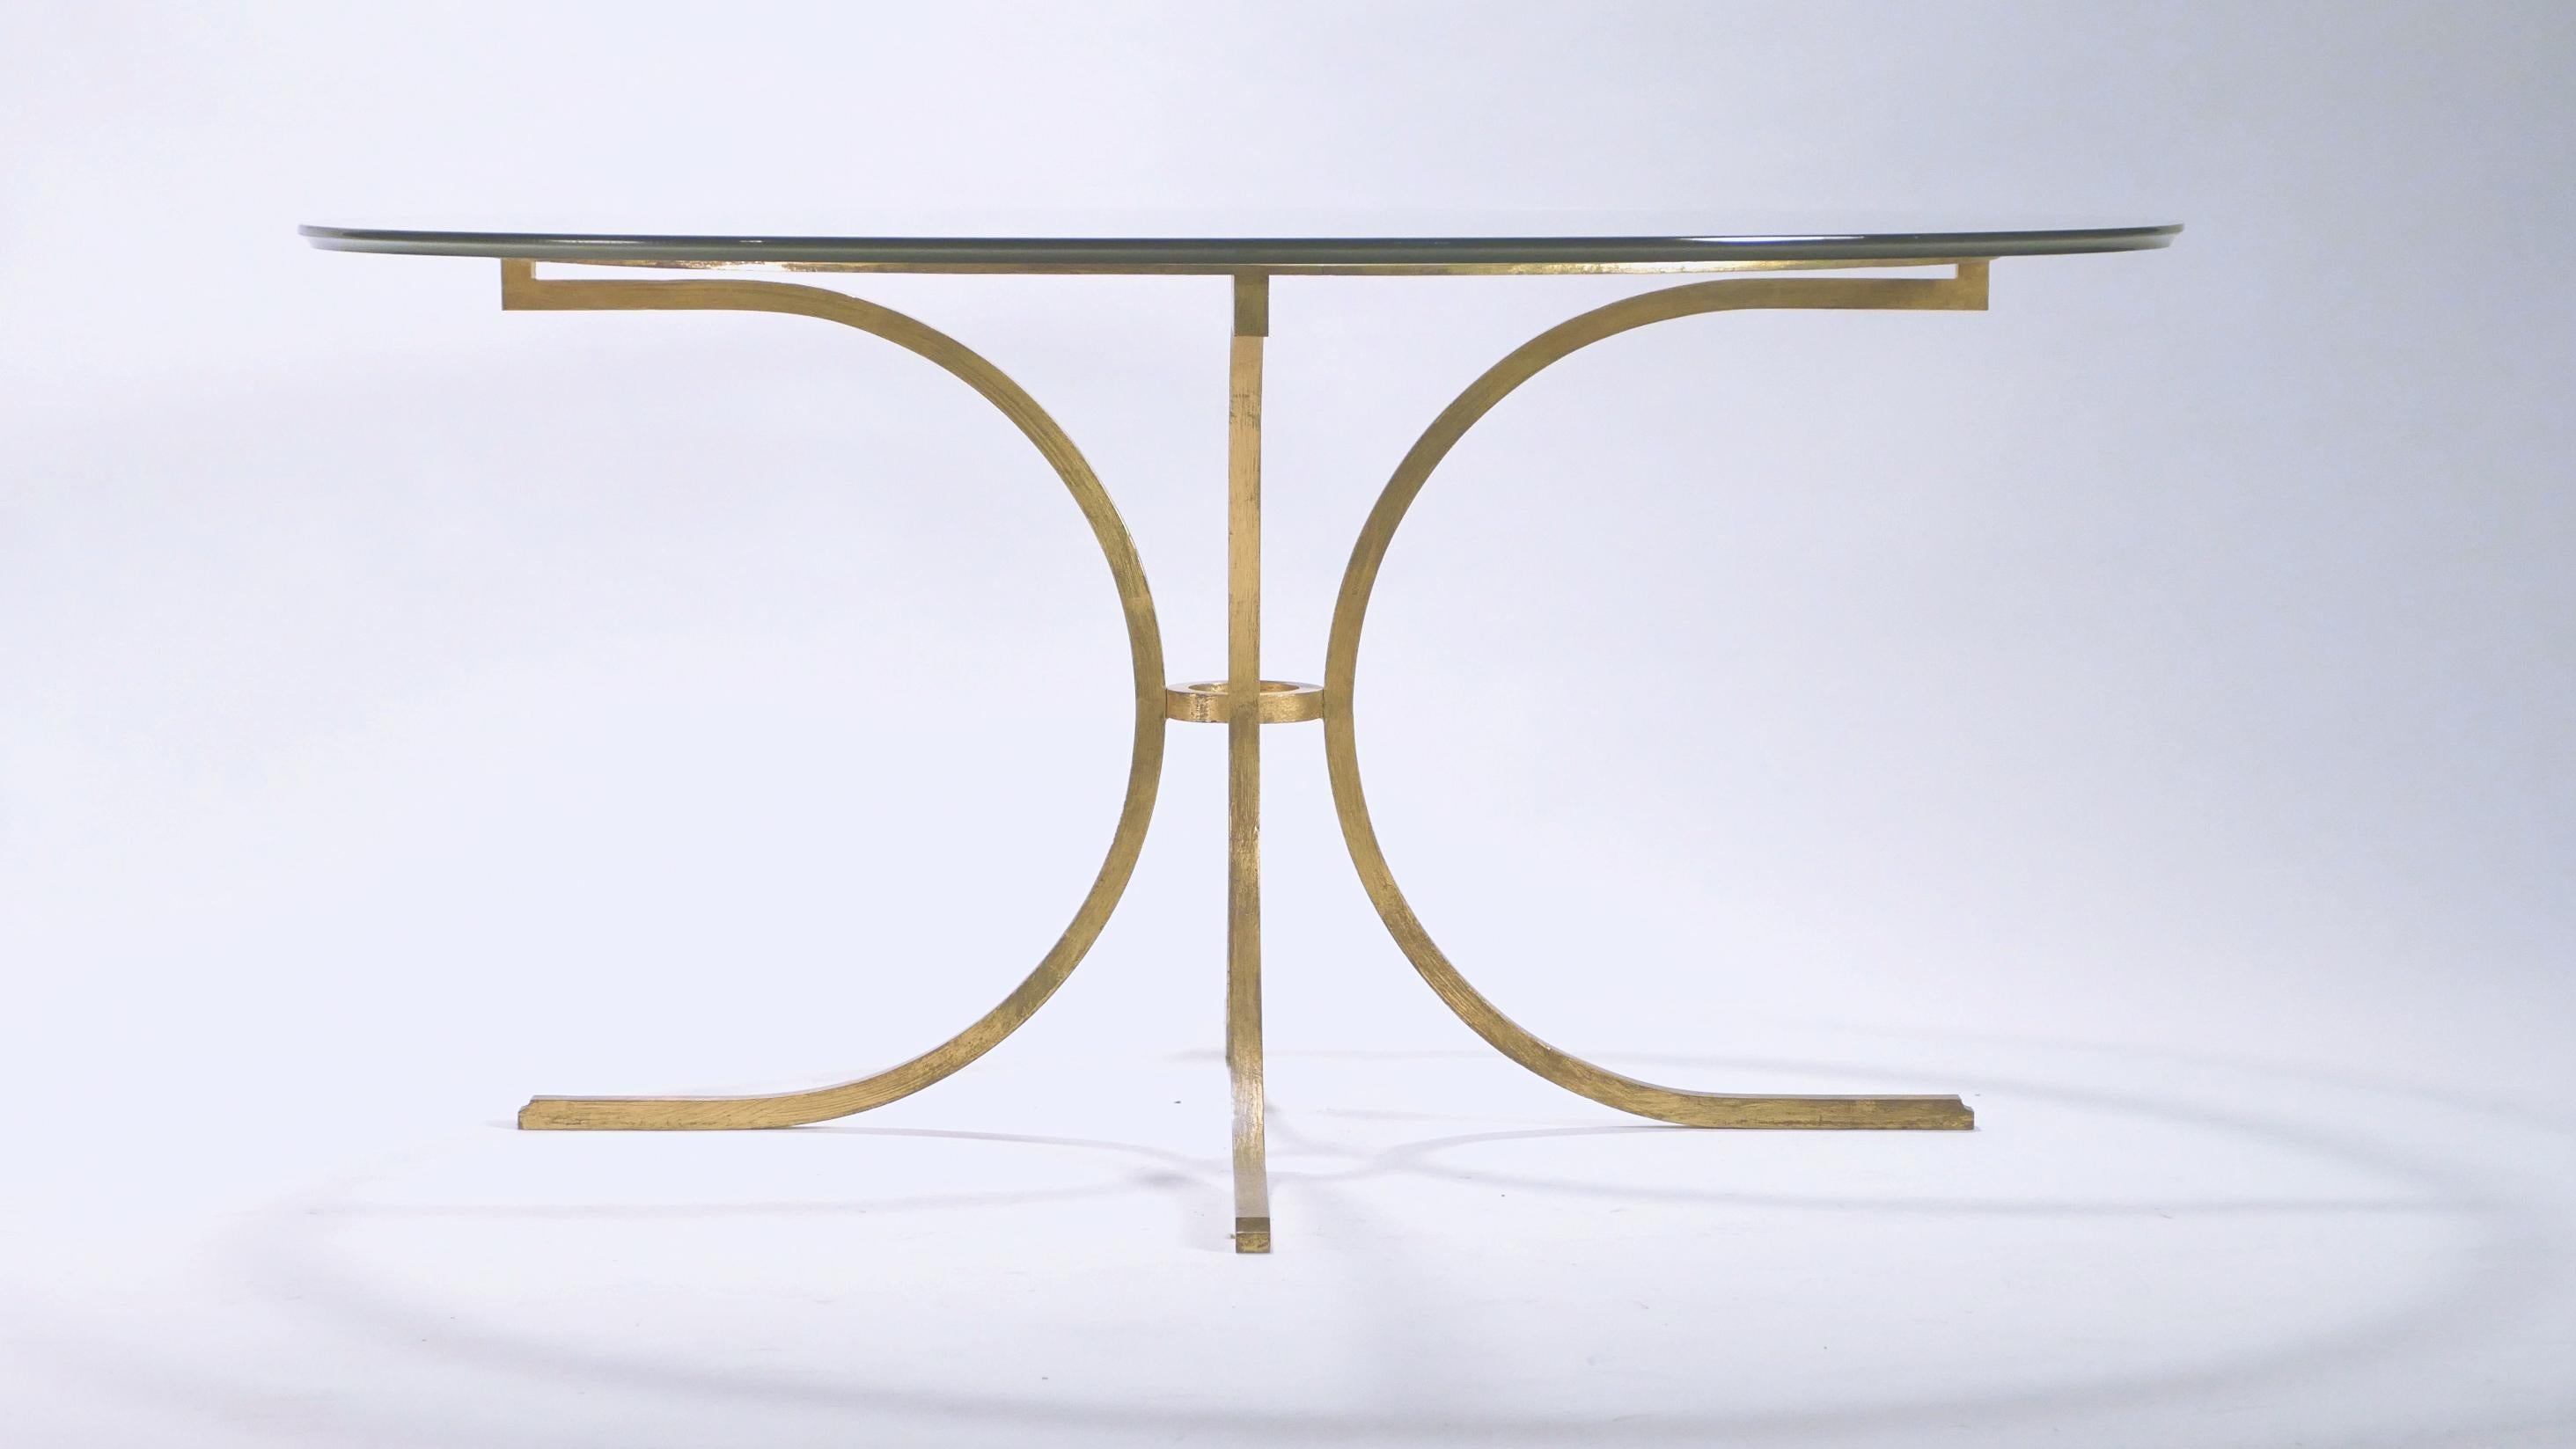 A strategically sparse design with high quality materials gives this rare dining table a sturdy yet delicate appeal. Wrought iron has been gilded with gold leaf for a gentle warm golden patina throughout the entire structure. A thick transparent